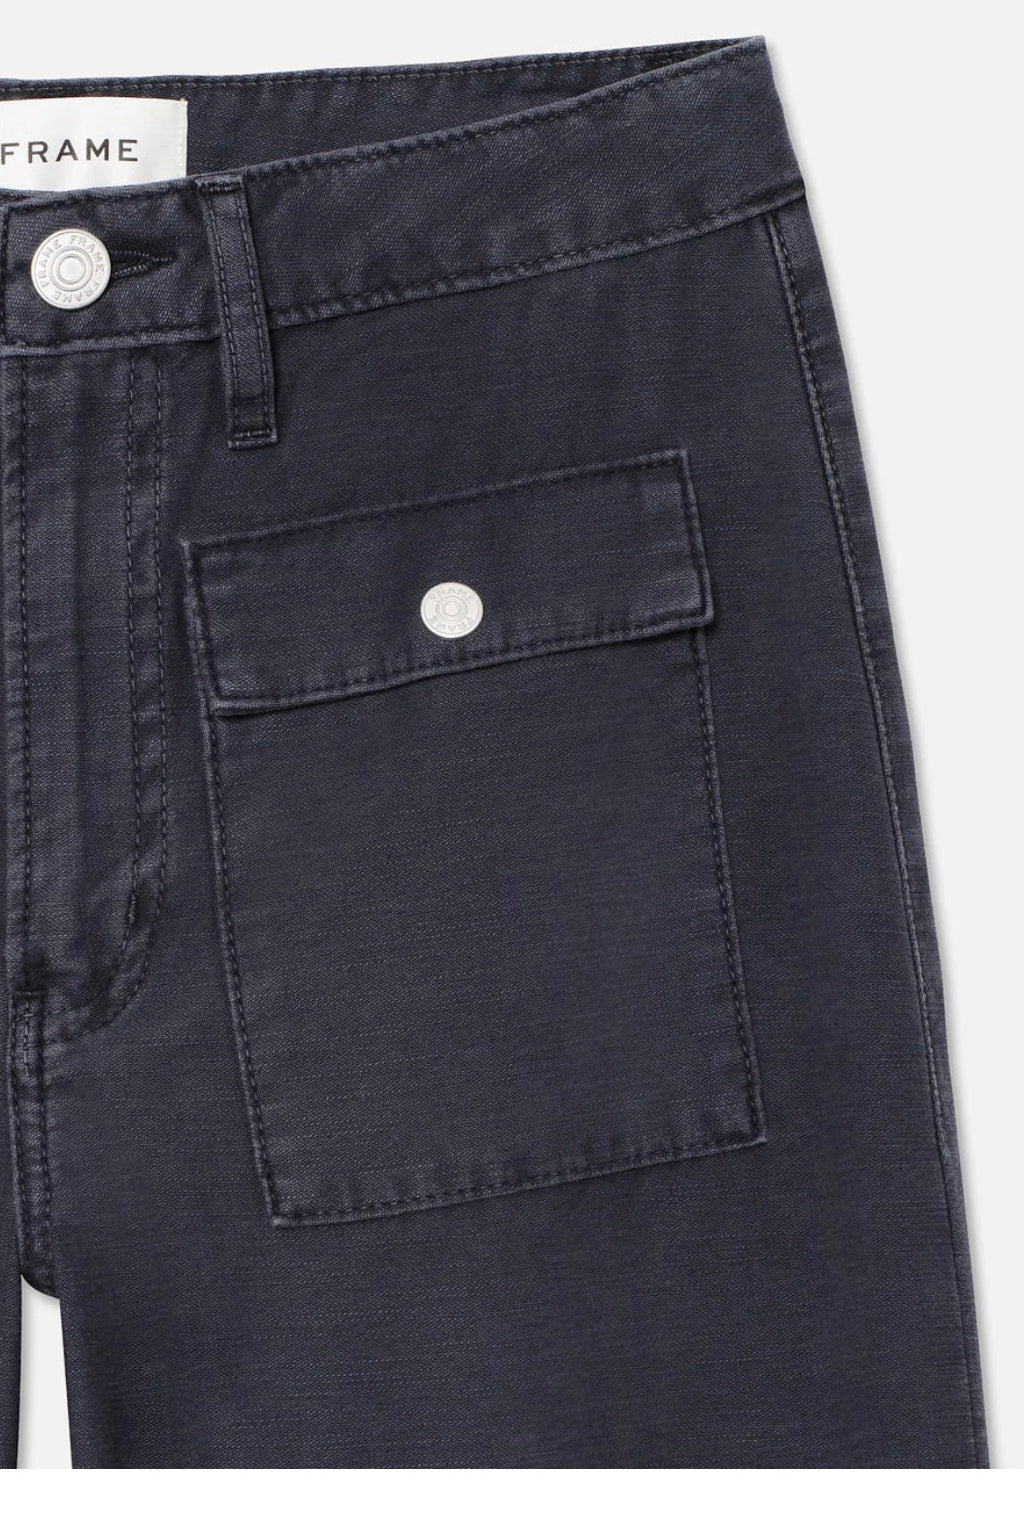 Frame - The 70s Patch Pocket Crop (Washed Navy)